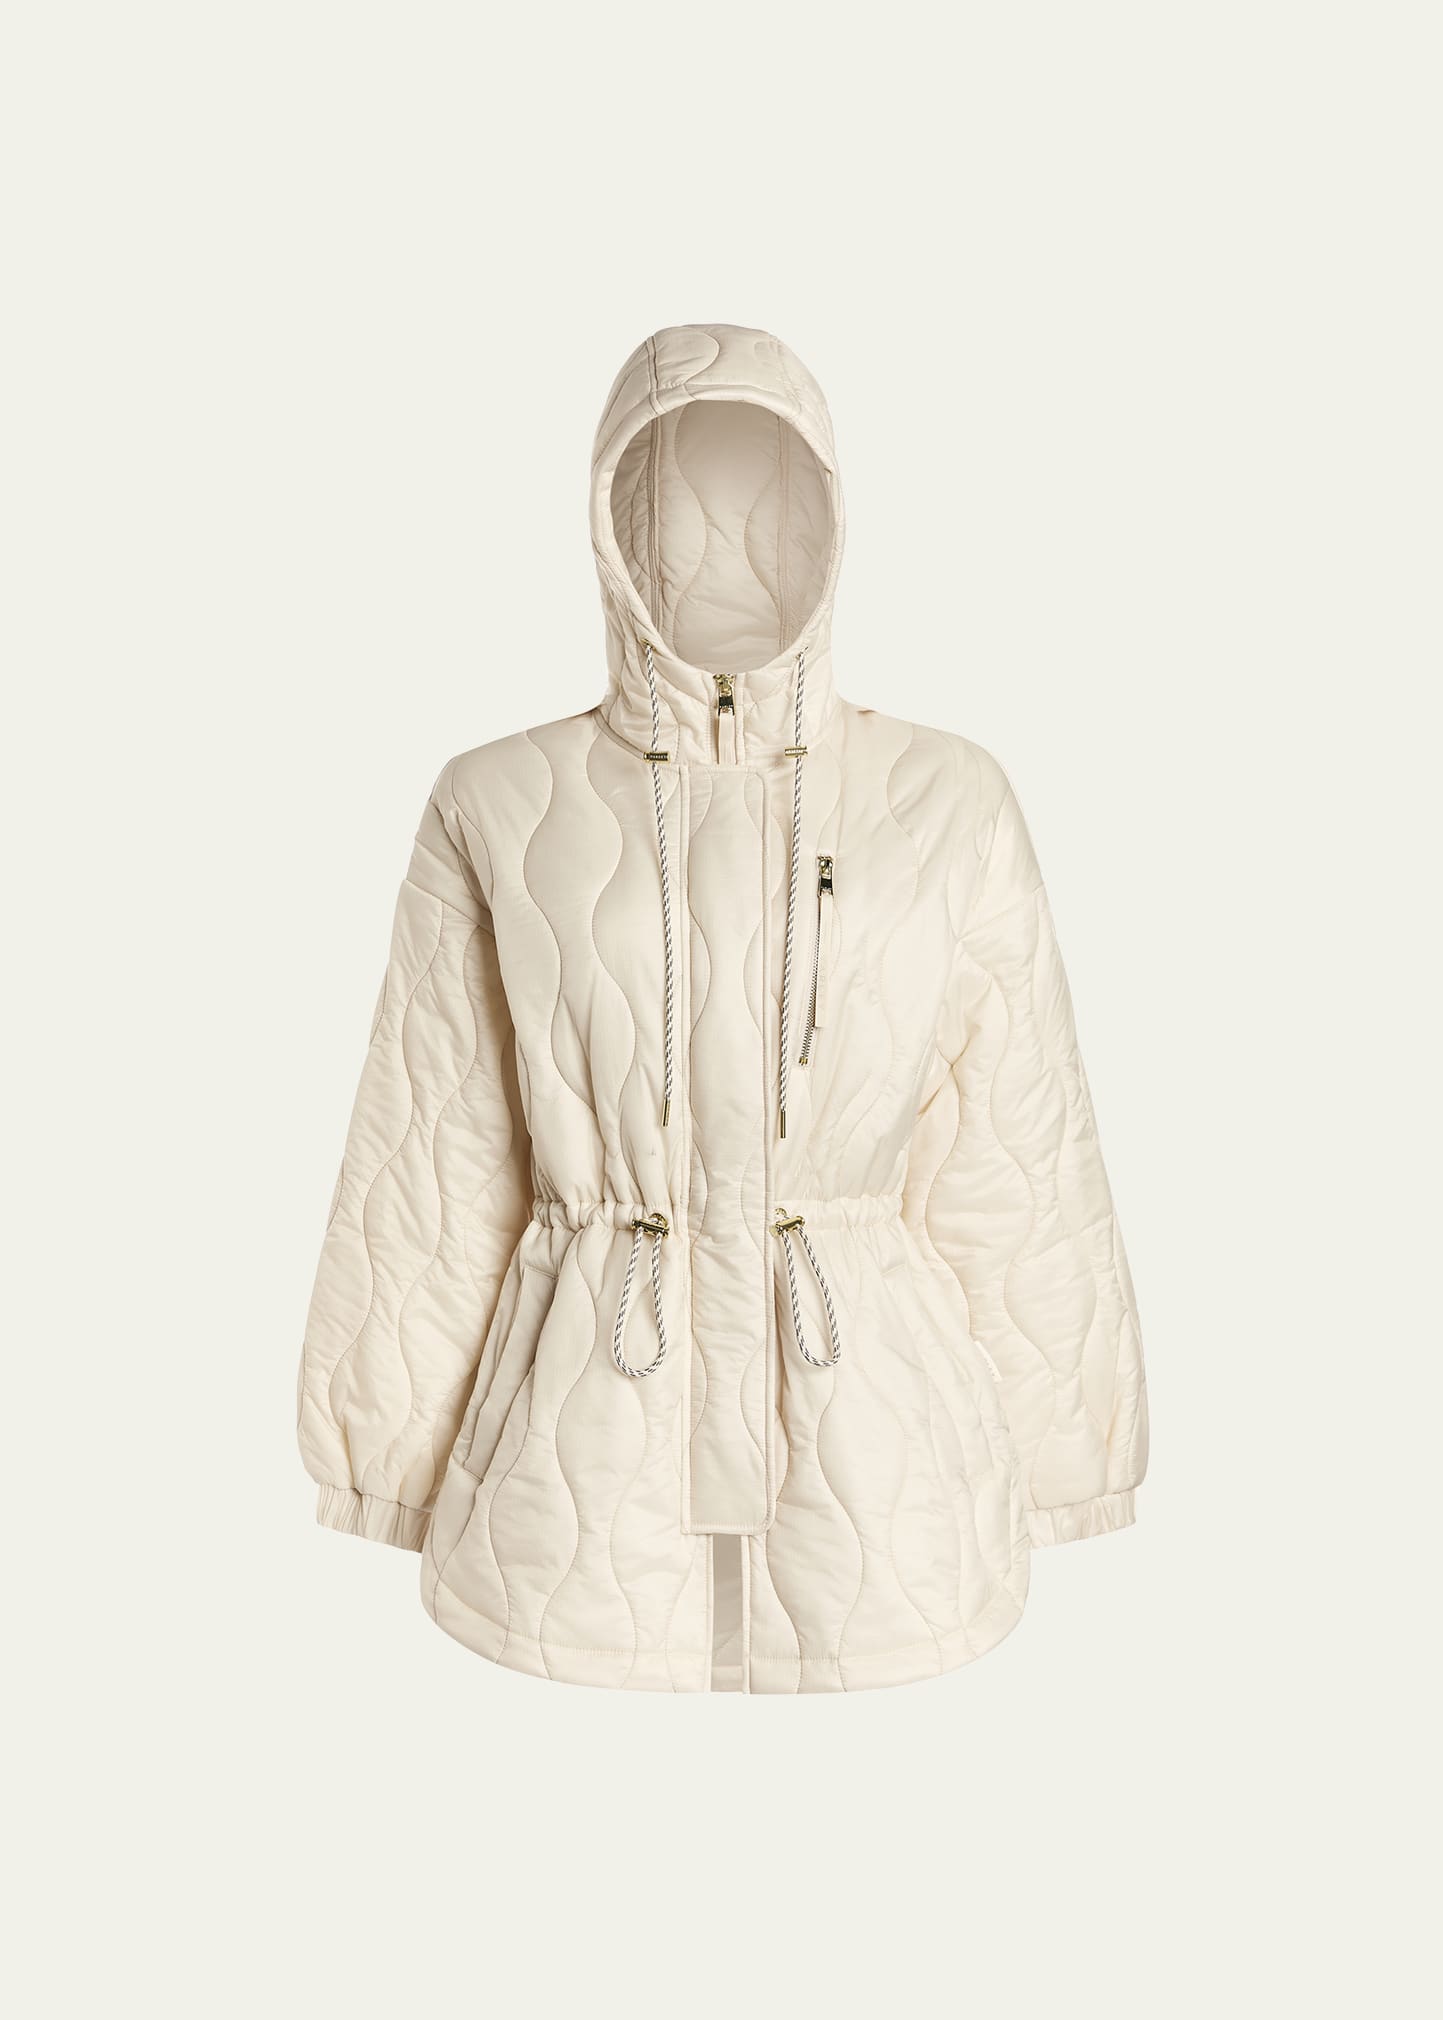 Varley Caitlin Quilted Hooded Jacket | Bergdorf Goodman